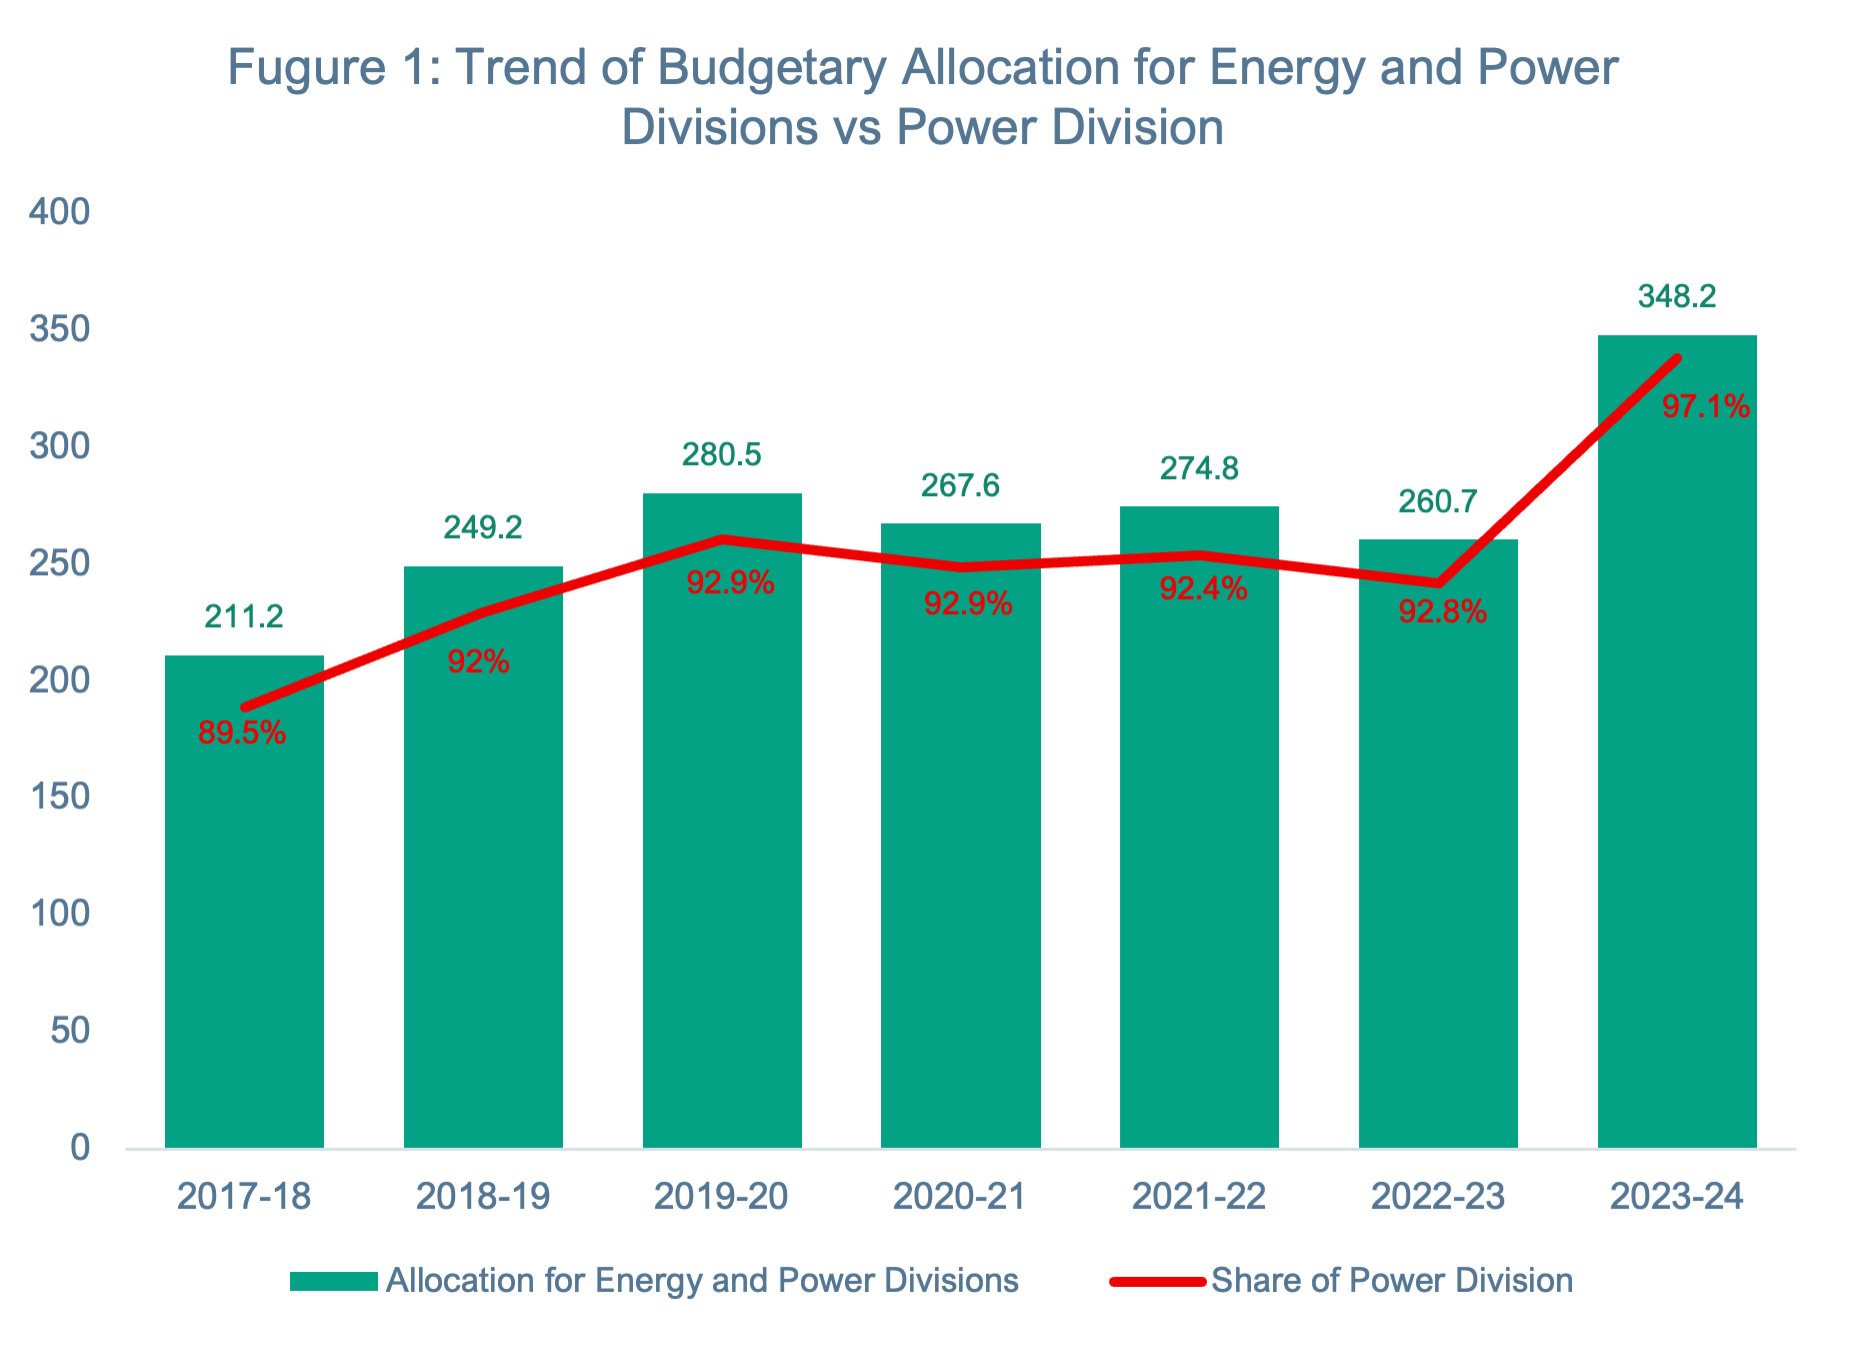 Bangladesh's budgetary allocation for energy and power divisions